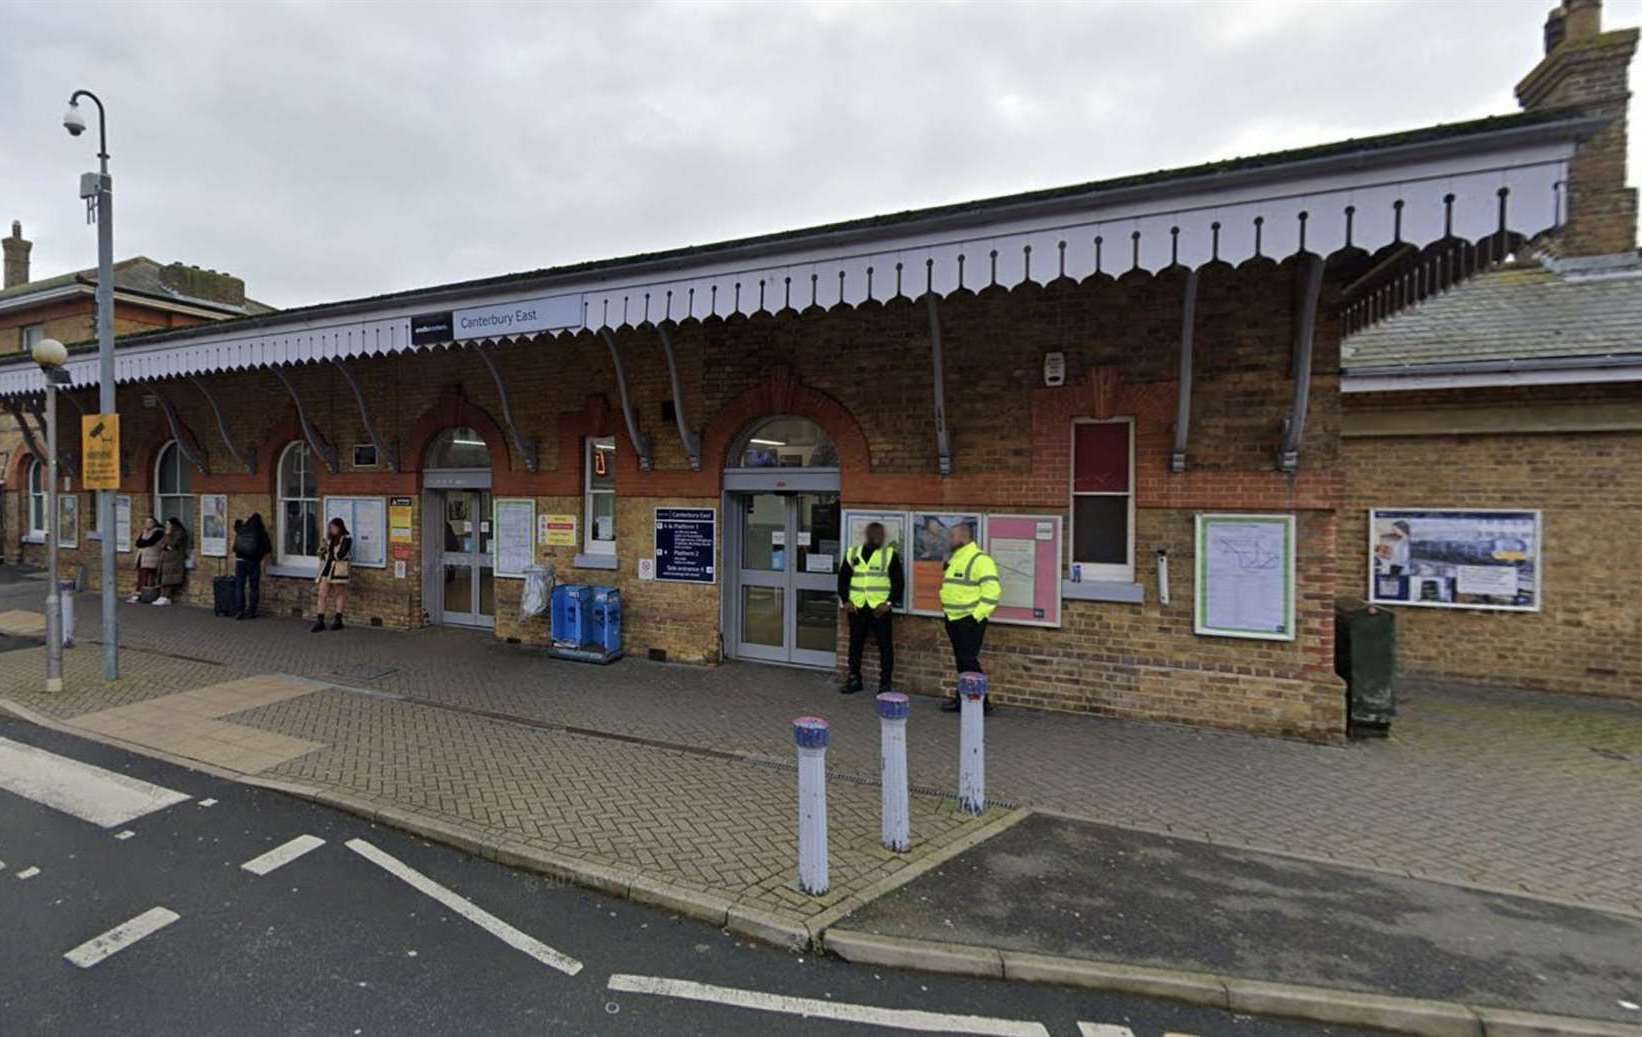 The couple were arrested at Canterbury East Station